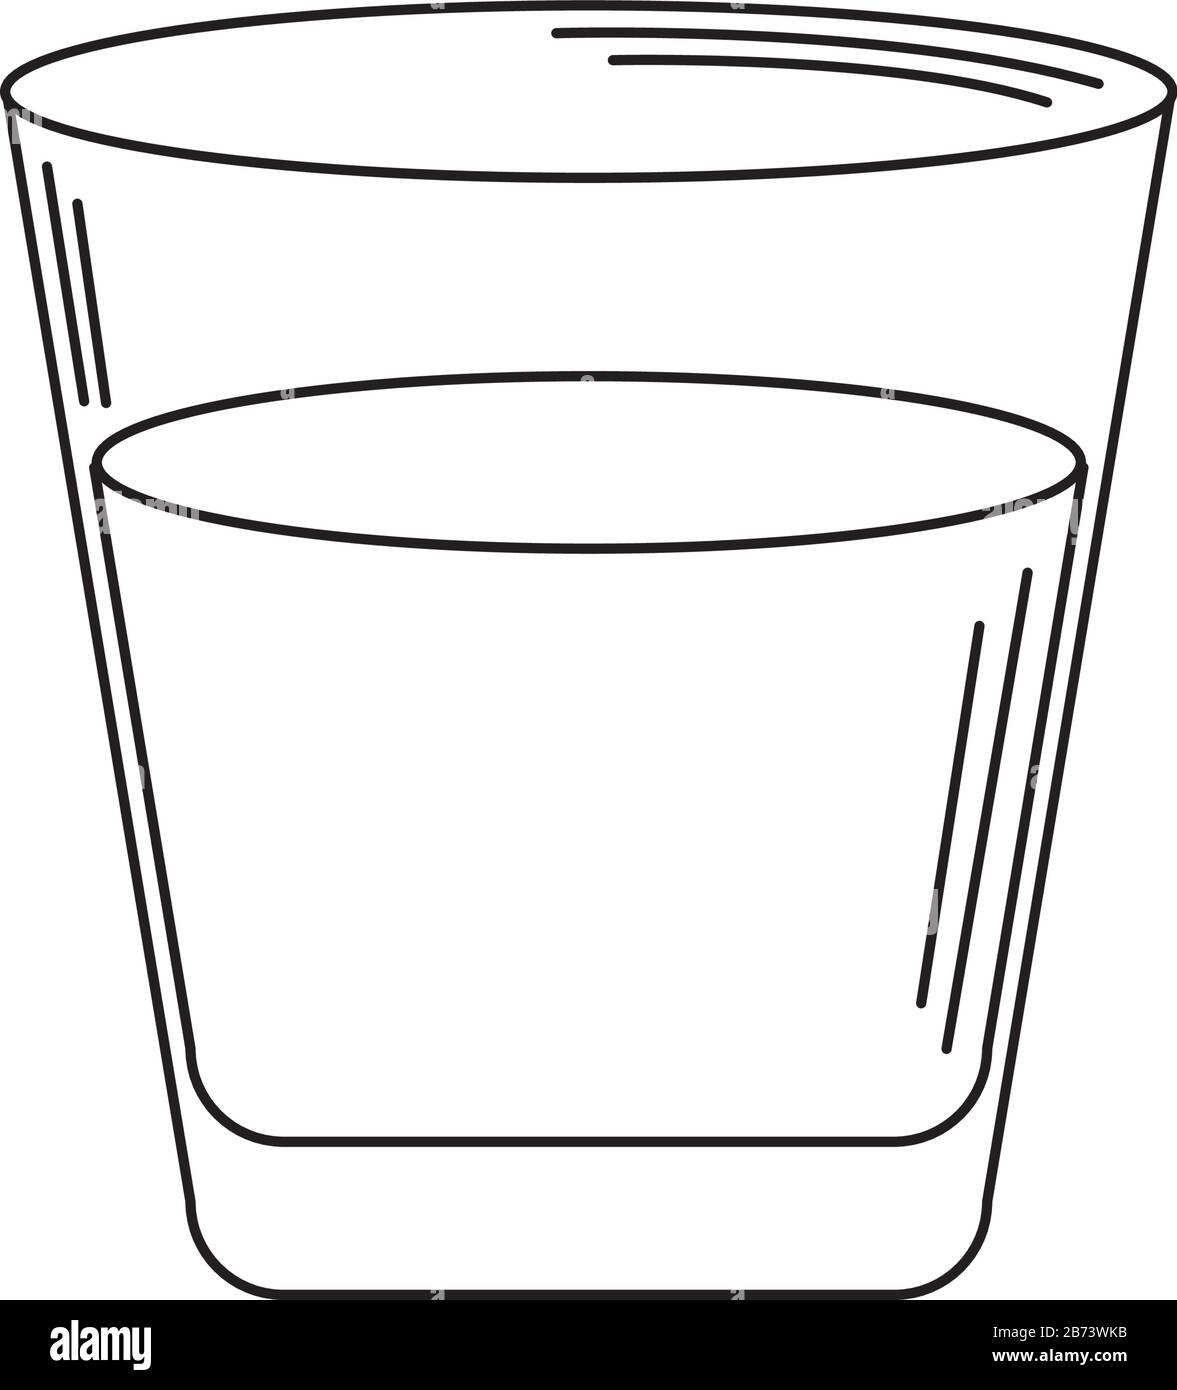 Pencil Sketch Of A Glass Of Water - Desi Painters